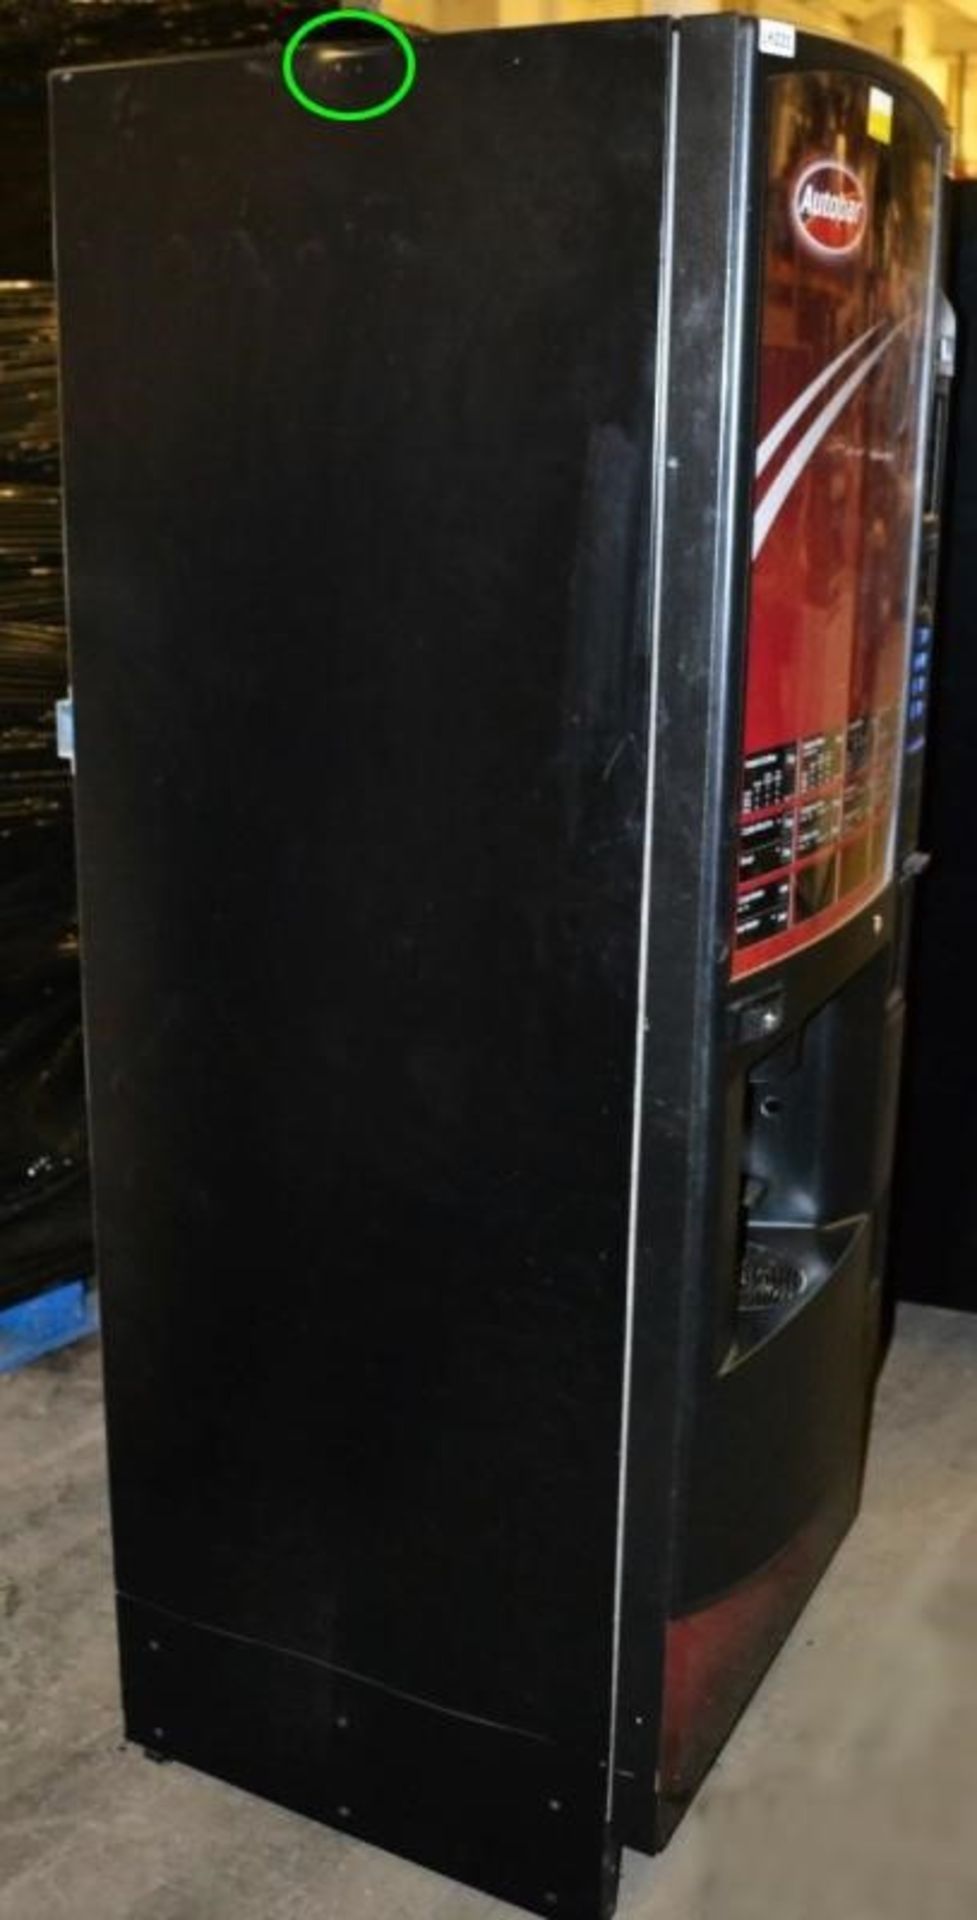 1 x Crane "Evolution" Coin-operated Hot Drinks Vending Machine - Recently taken From A Working Envir - Image 15 of 17